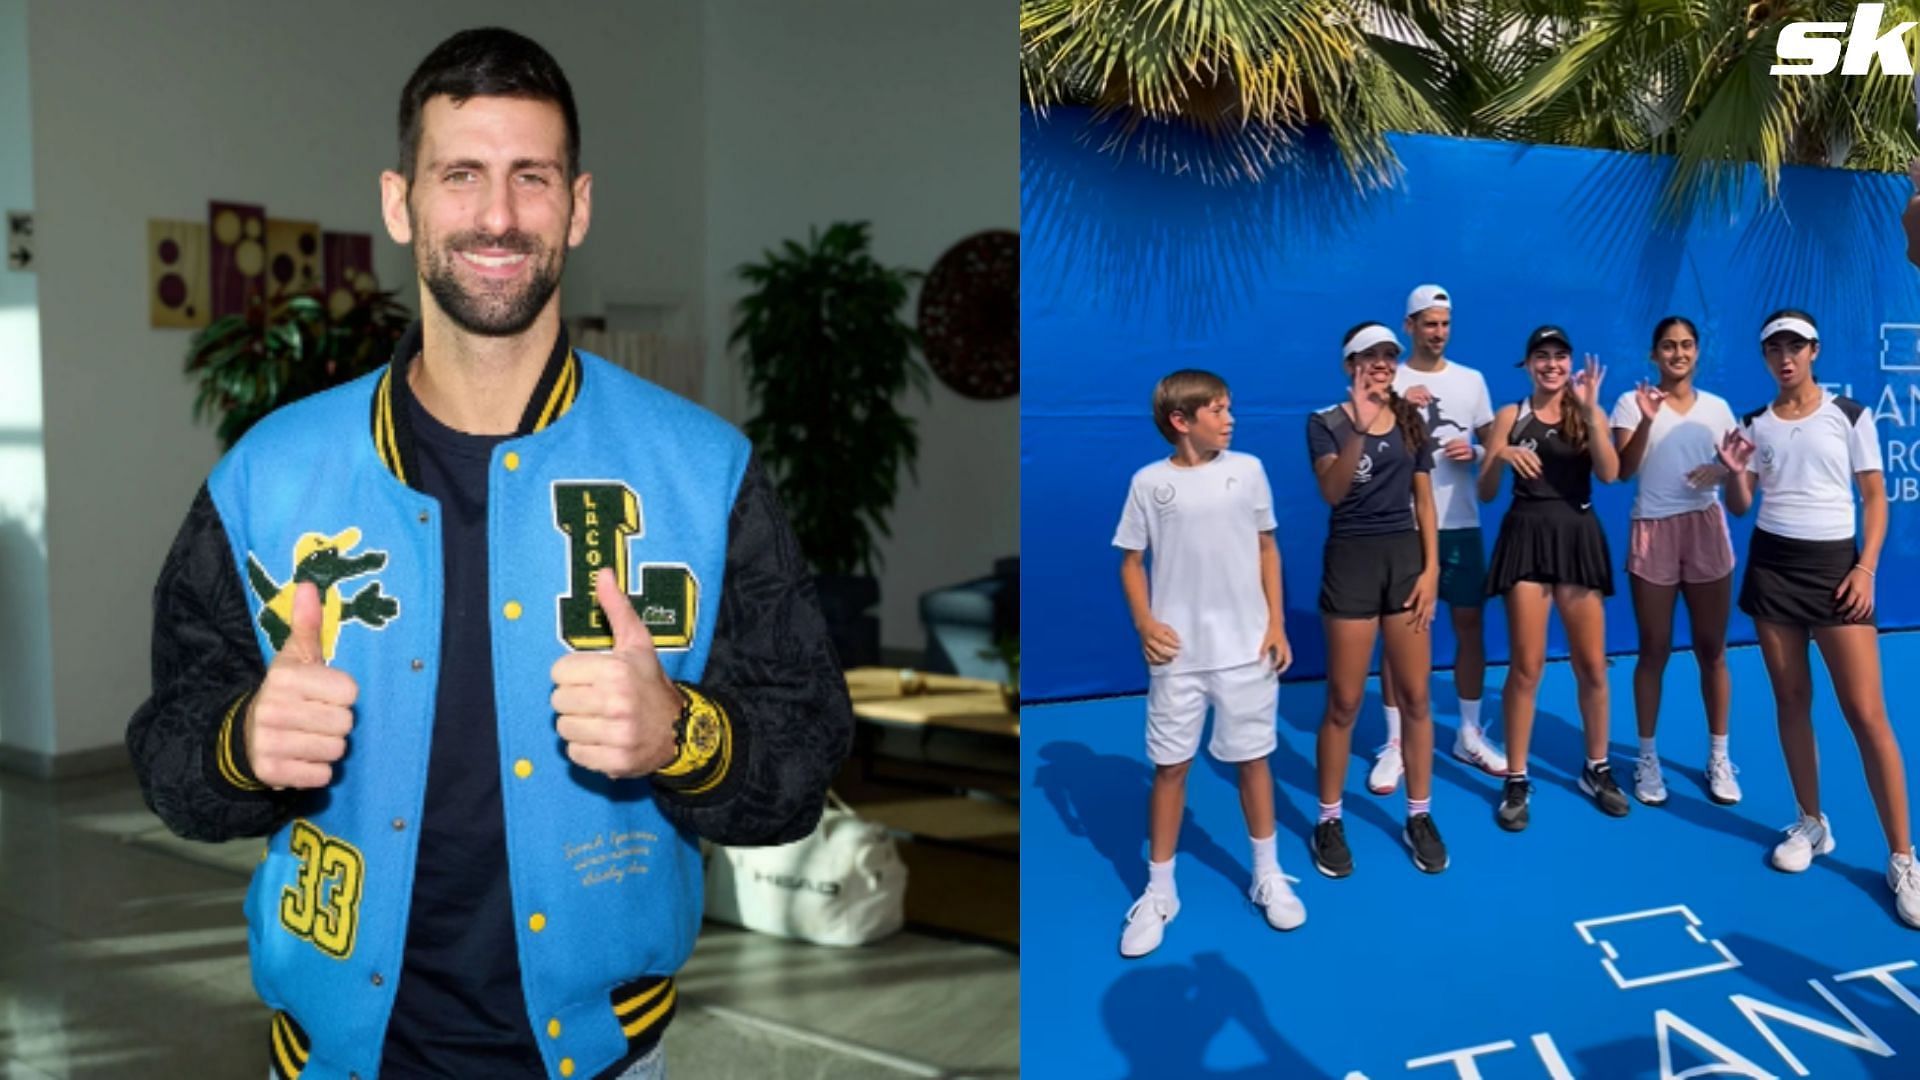 Novak Djokovic enjoys time with children at the Rackets Academy in Dubai - Instagram &amp; Getty Images